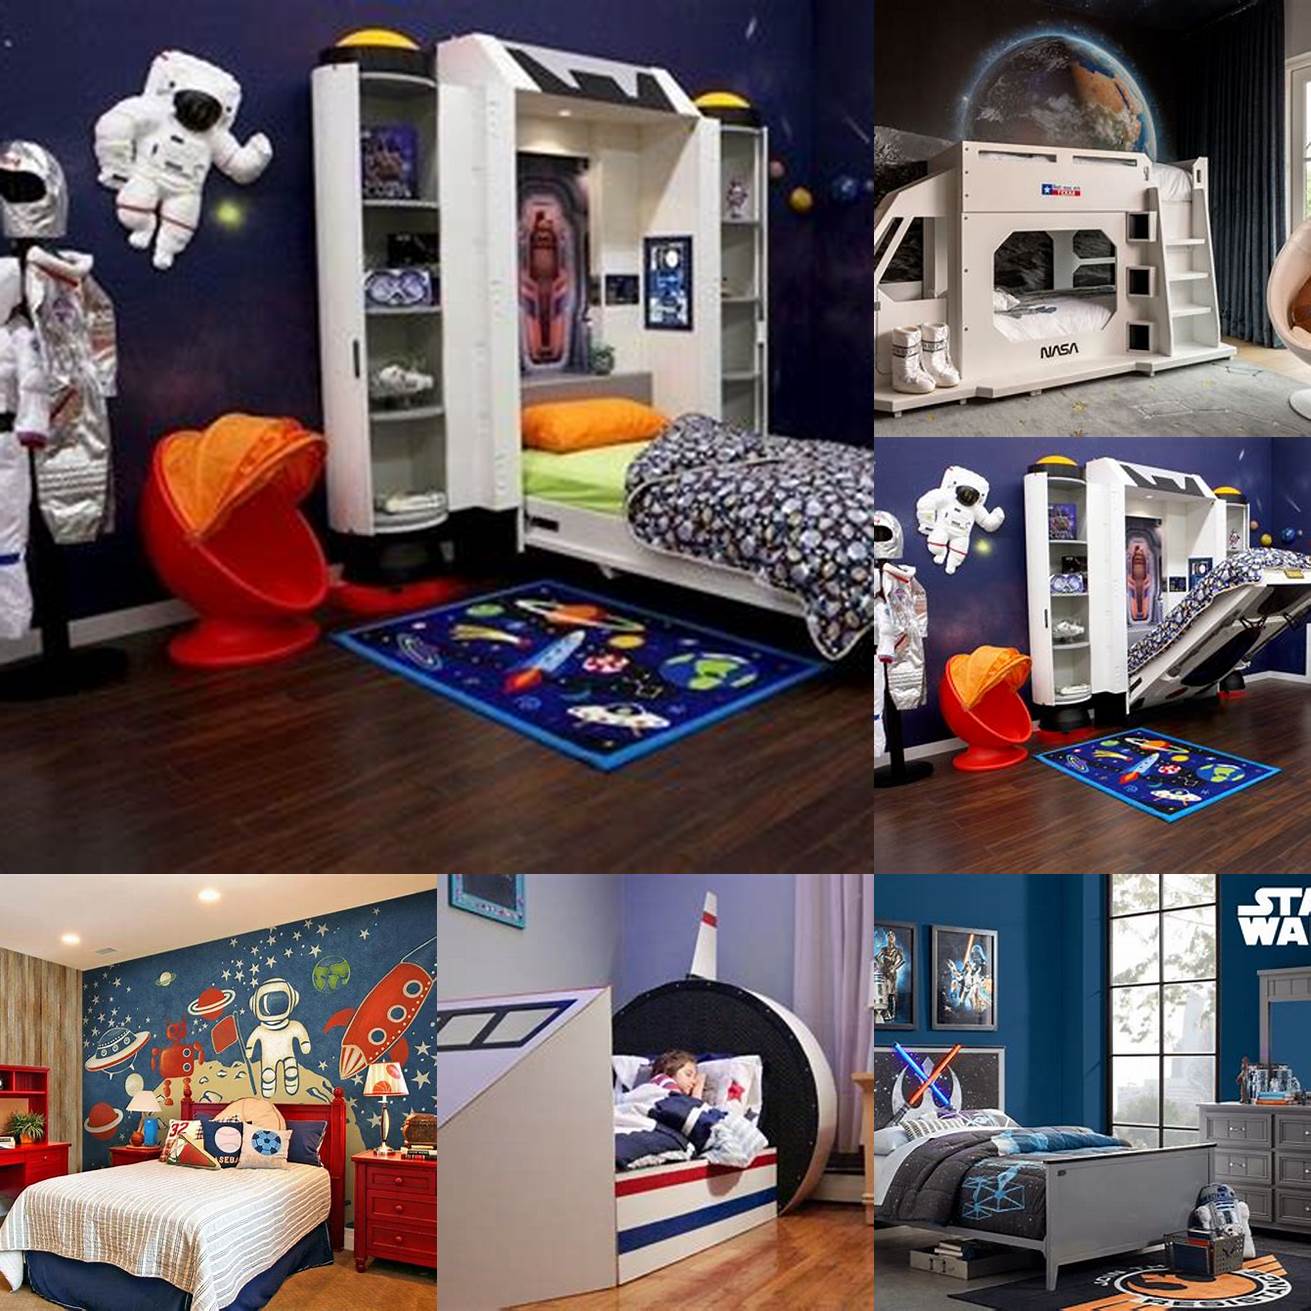 This space-themed set includes a bunk bed frame nightstand and dresser perfect for a boy who dreams of being an astronaut